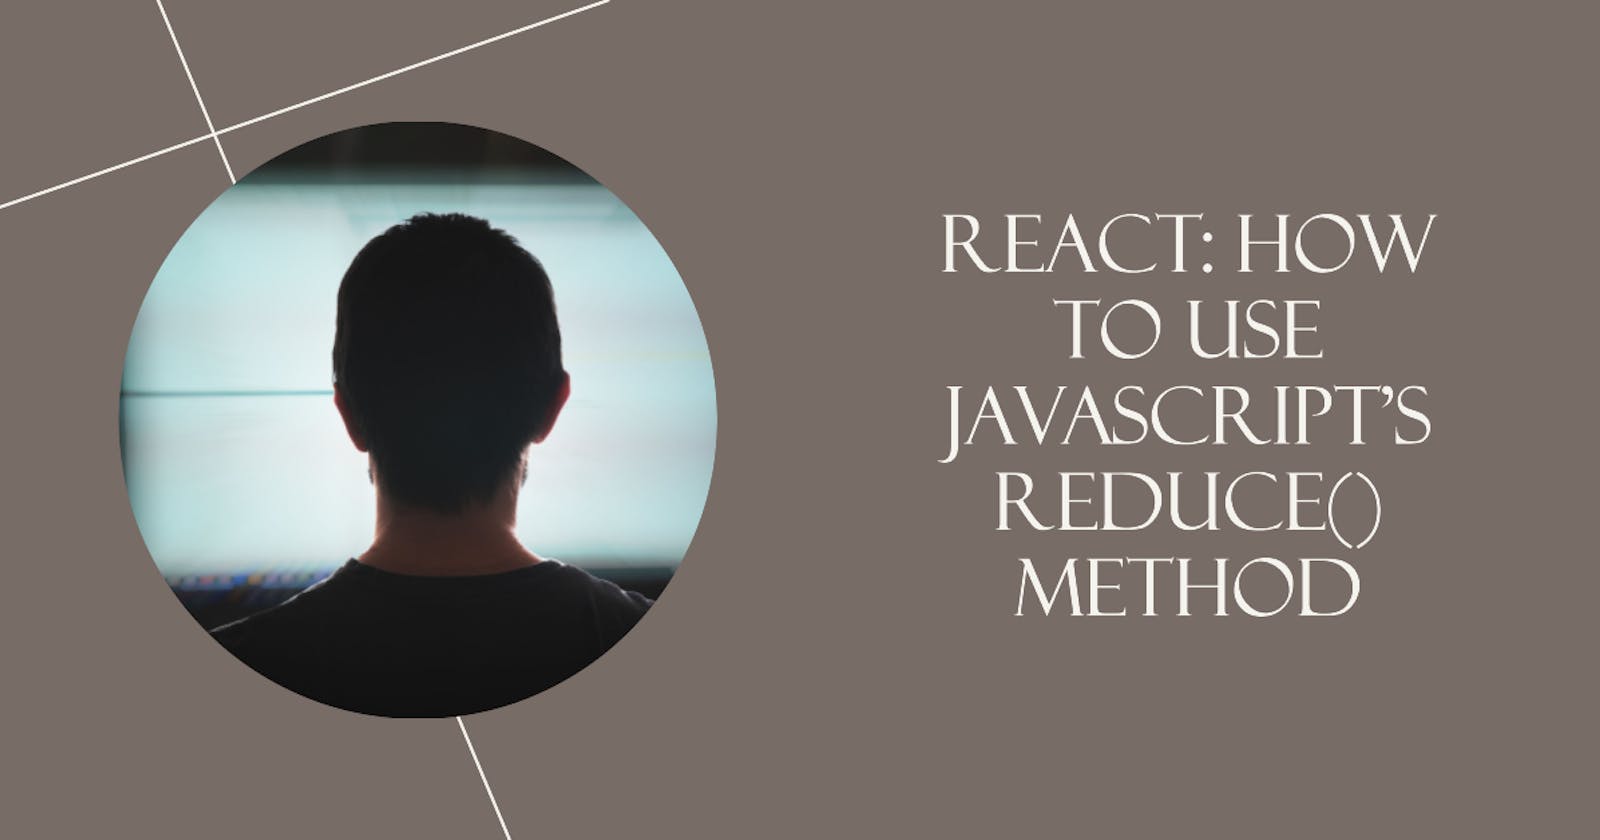 React: How to use JavaScript's reduce() method.